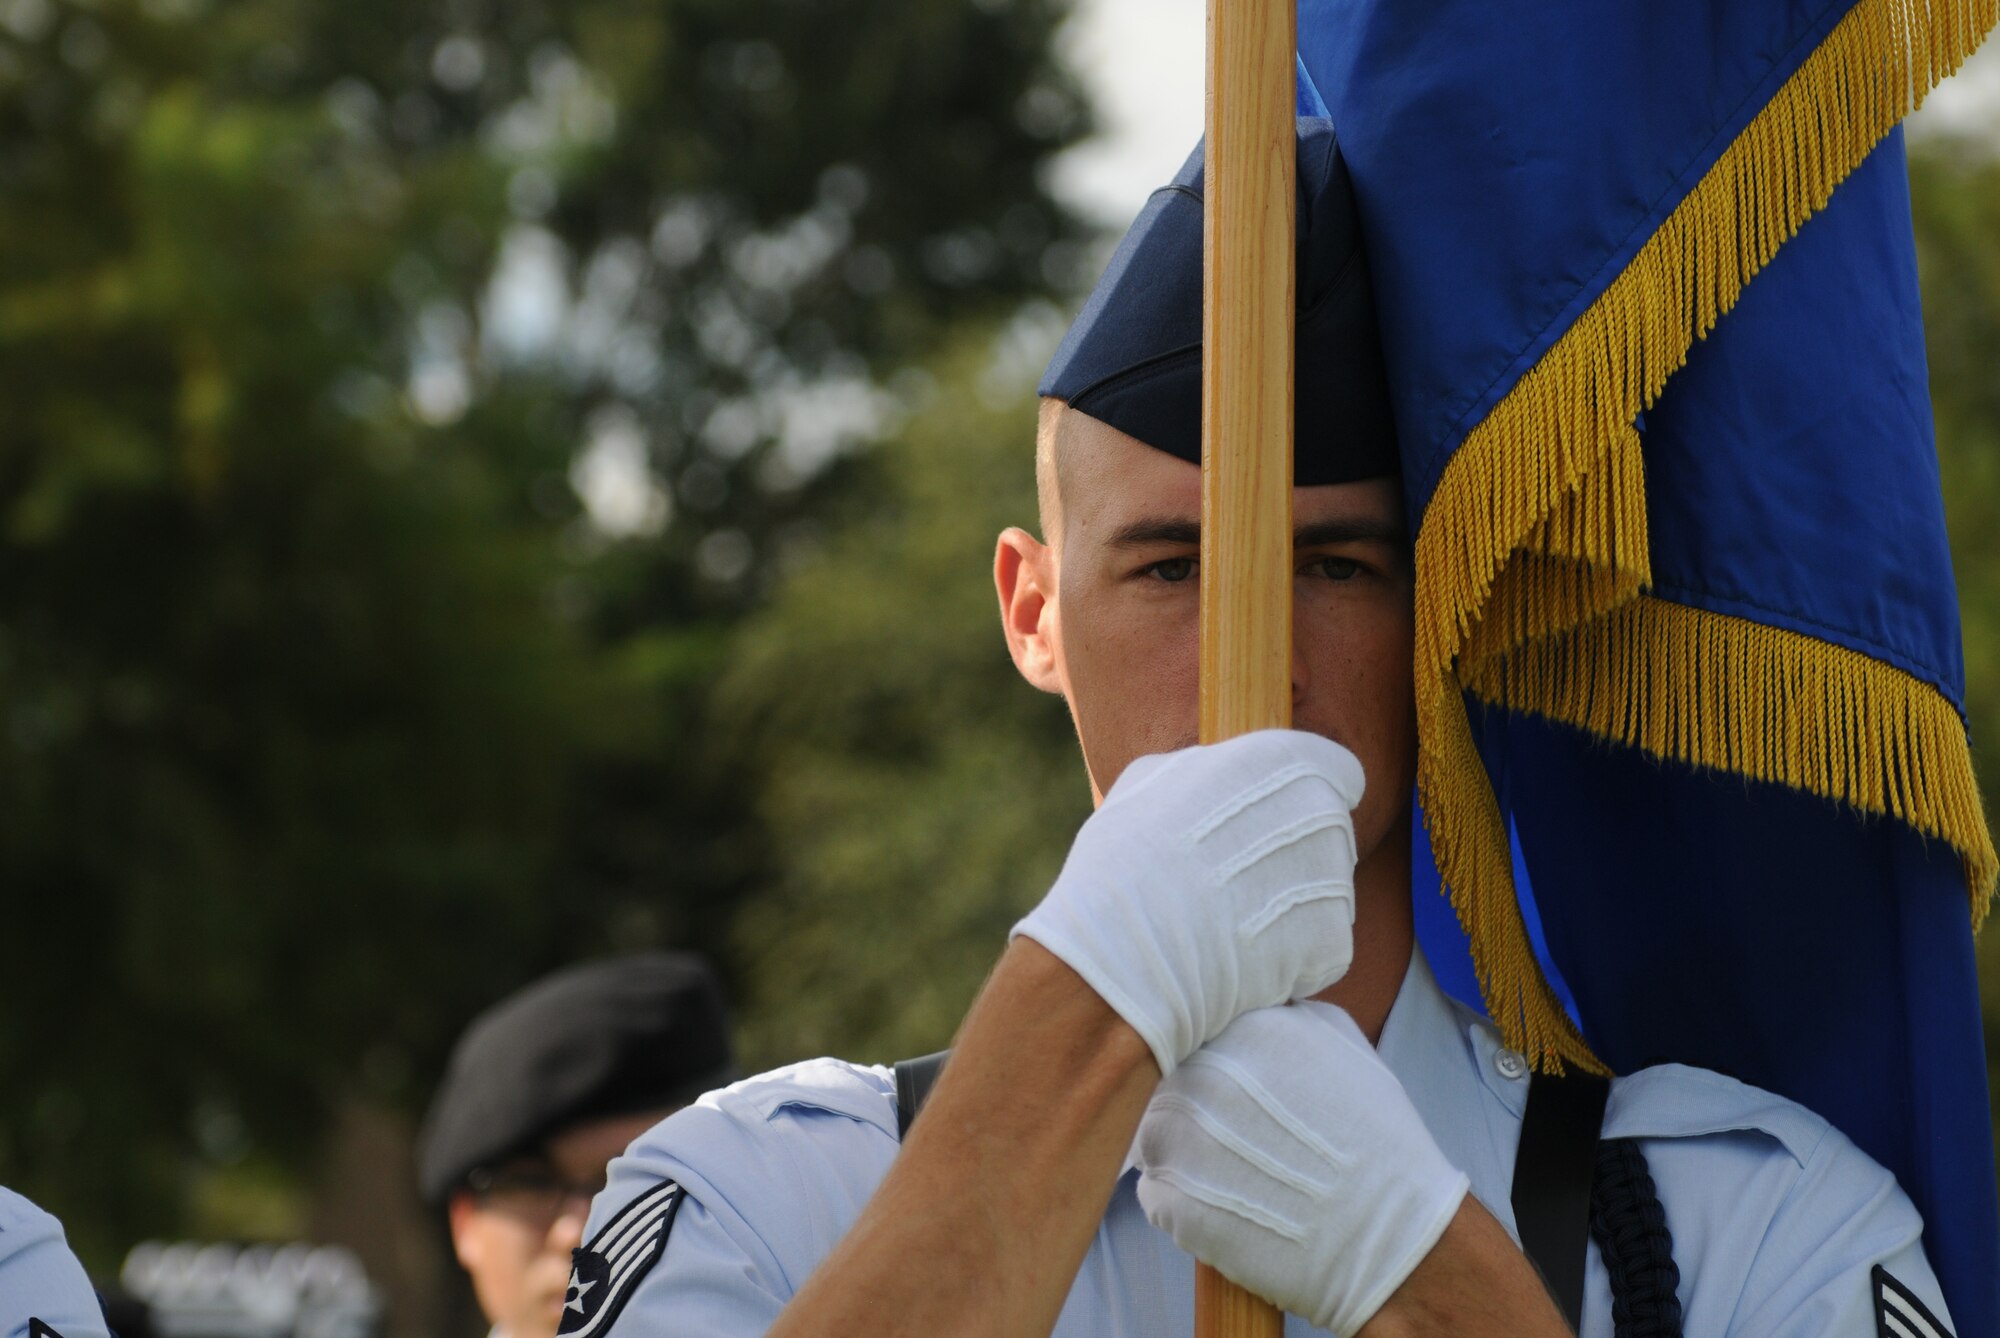 Staff Sgt. David Edmondson, 336th Training Squadron military training leader, holds the Air Force flag during the 2nd Air Force change of command ceremony at the Levitow Training Support Facility Aug. 23, 2017, on Keesler Air Force Base, Miss. Maj. Gen. Timothy Leahy took command of 2nd AF during the ceremony from Maj. Gen. Bob LaBrutta. (U.S. Air Force photo by Senior Airman Holly Mansfield)